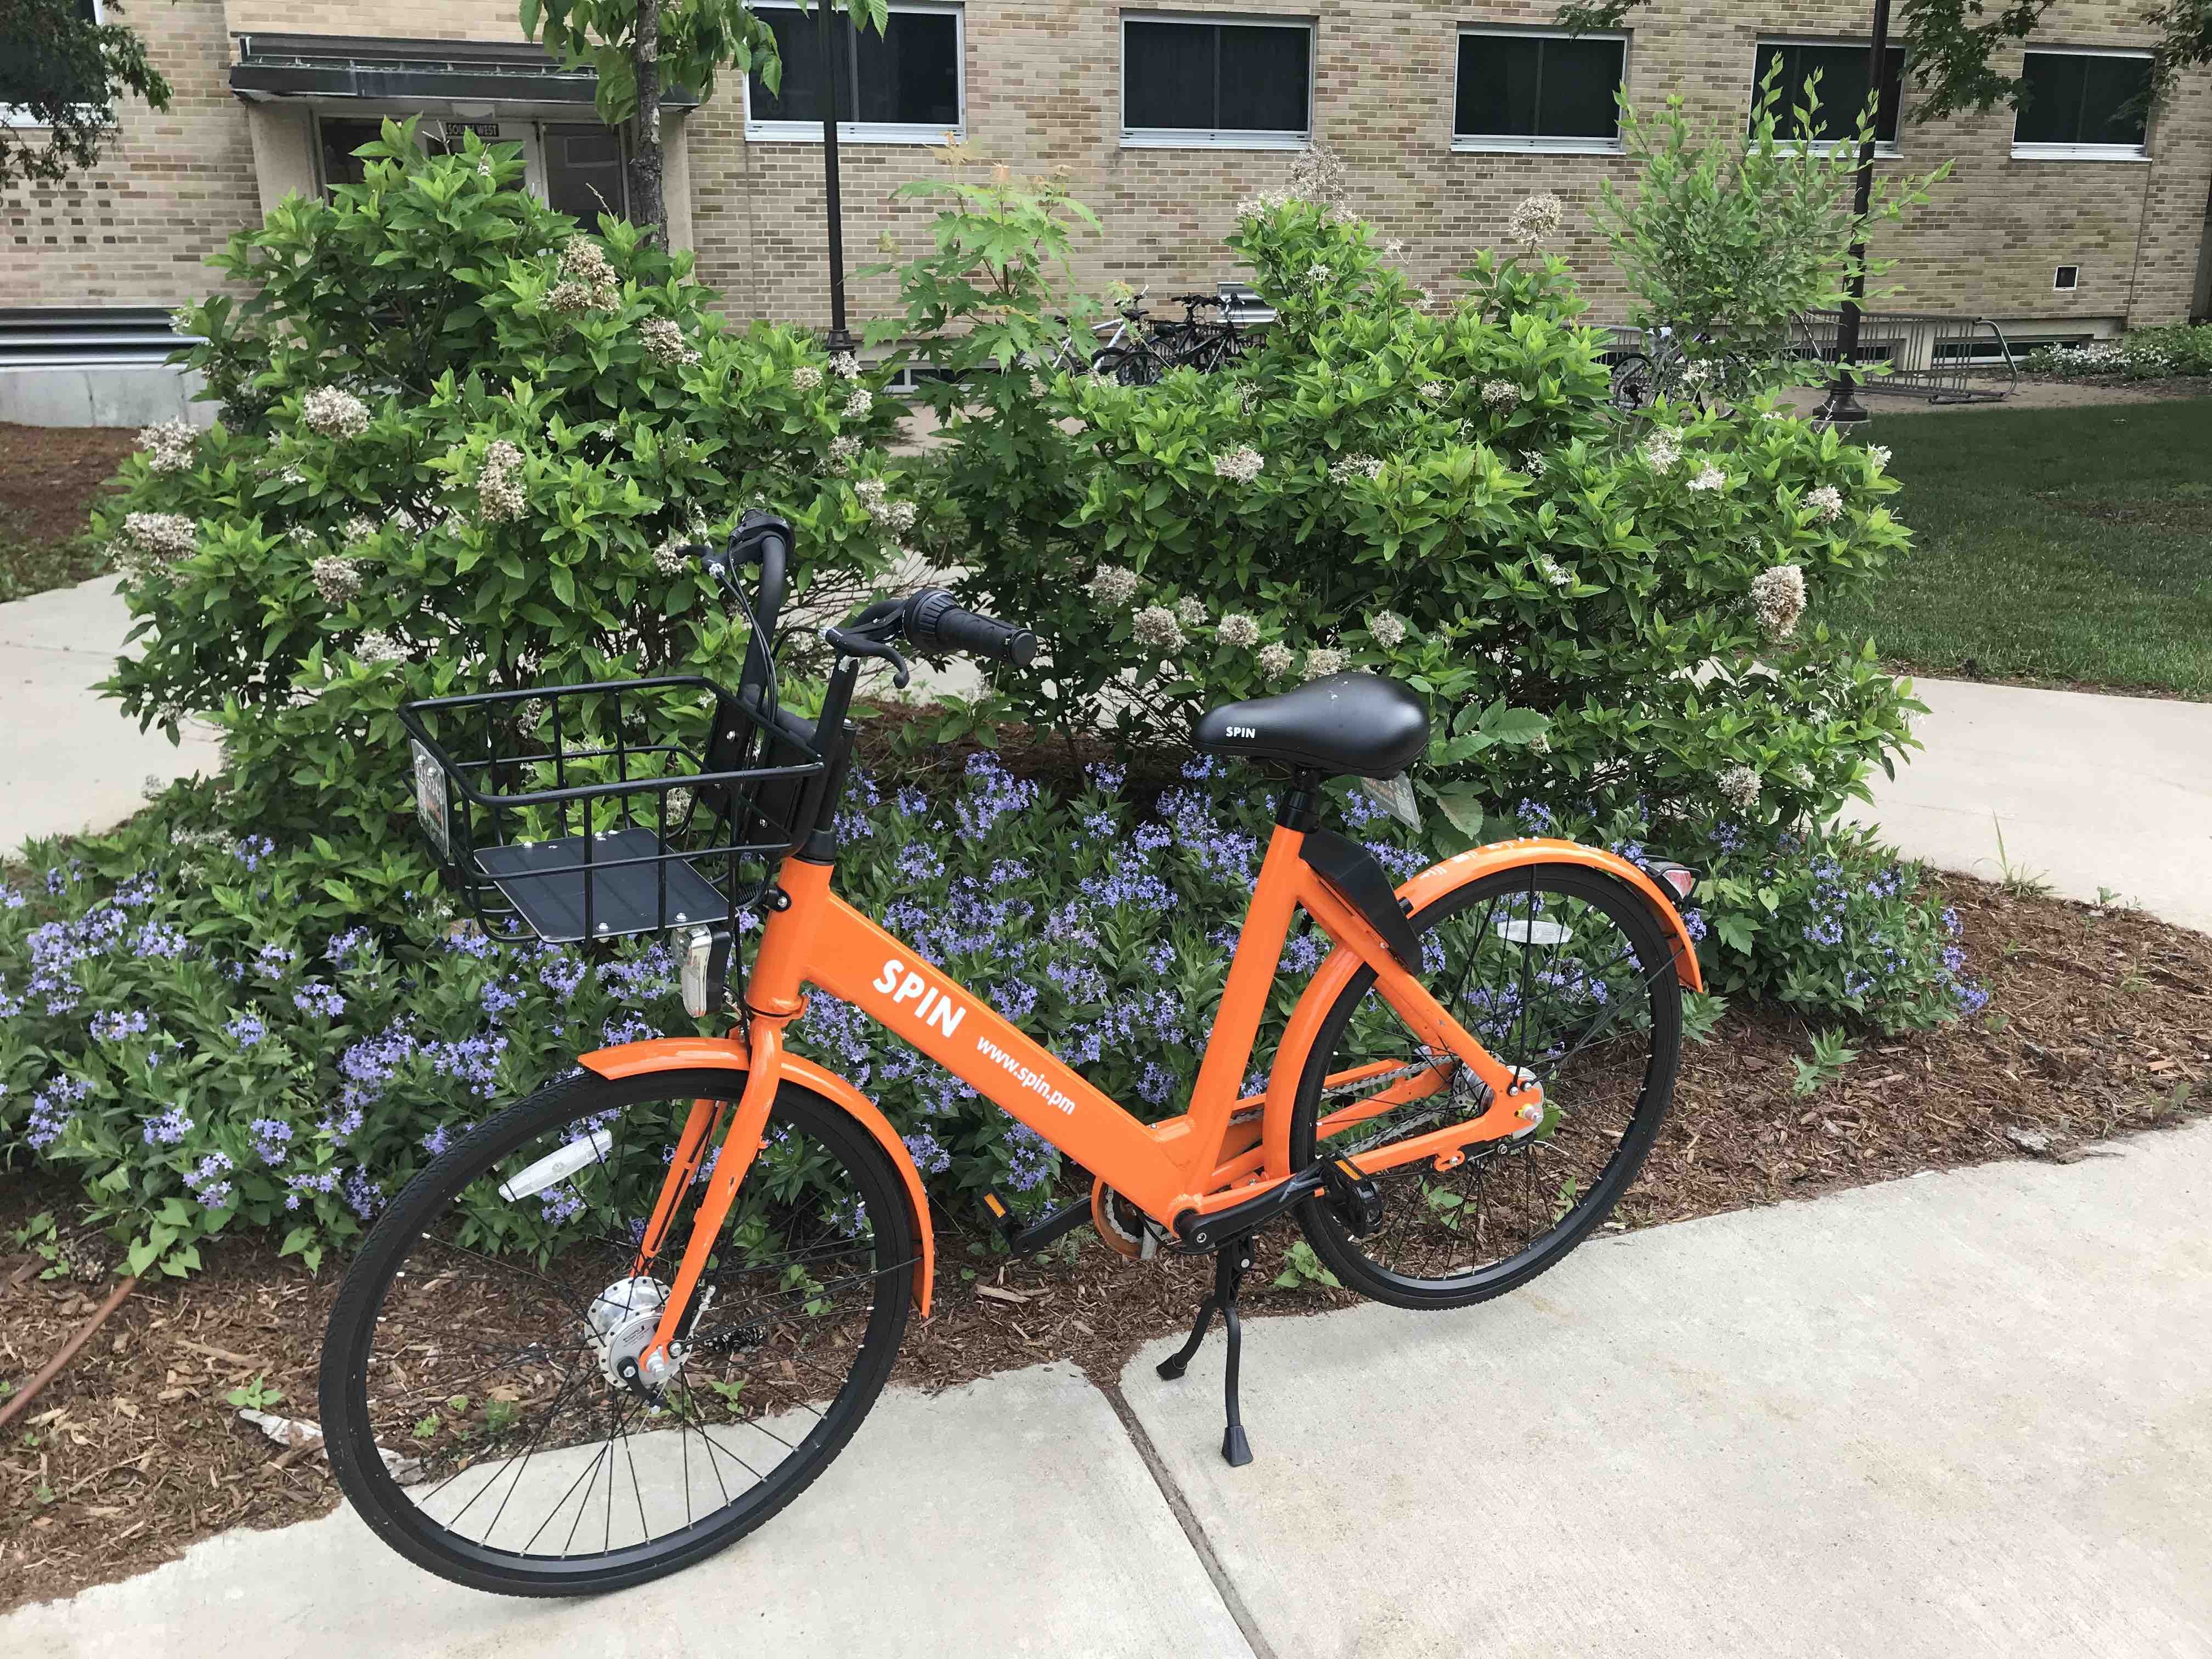 Take Spin bikes for a spin! Nicole Kivela shares a how-to guide for using UW-Stevens Point's bike share option.